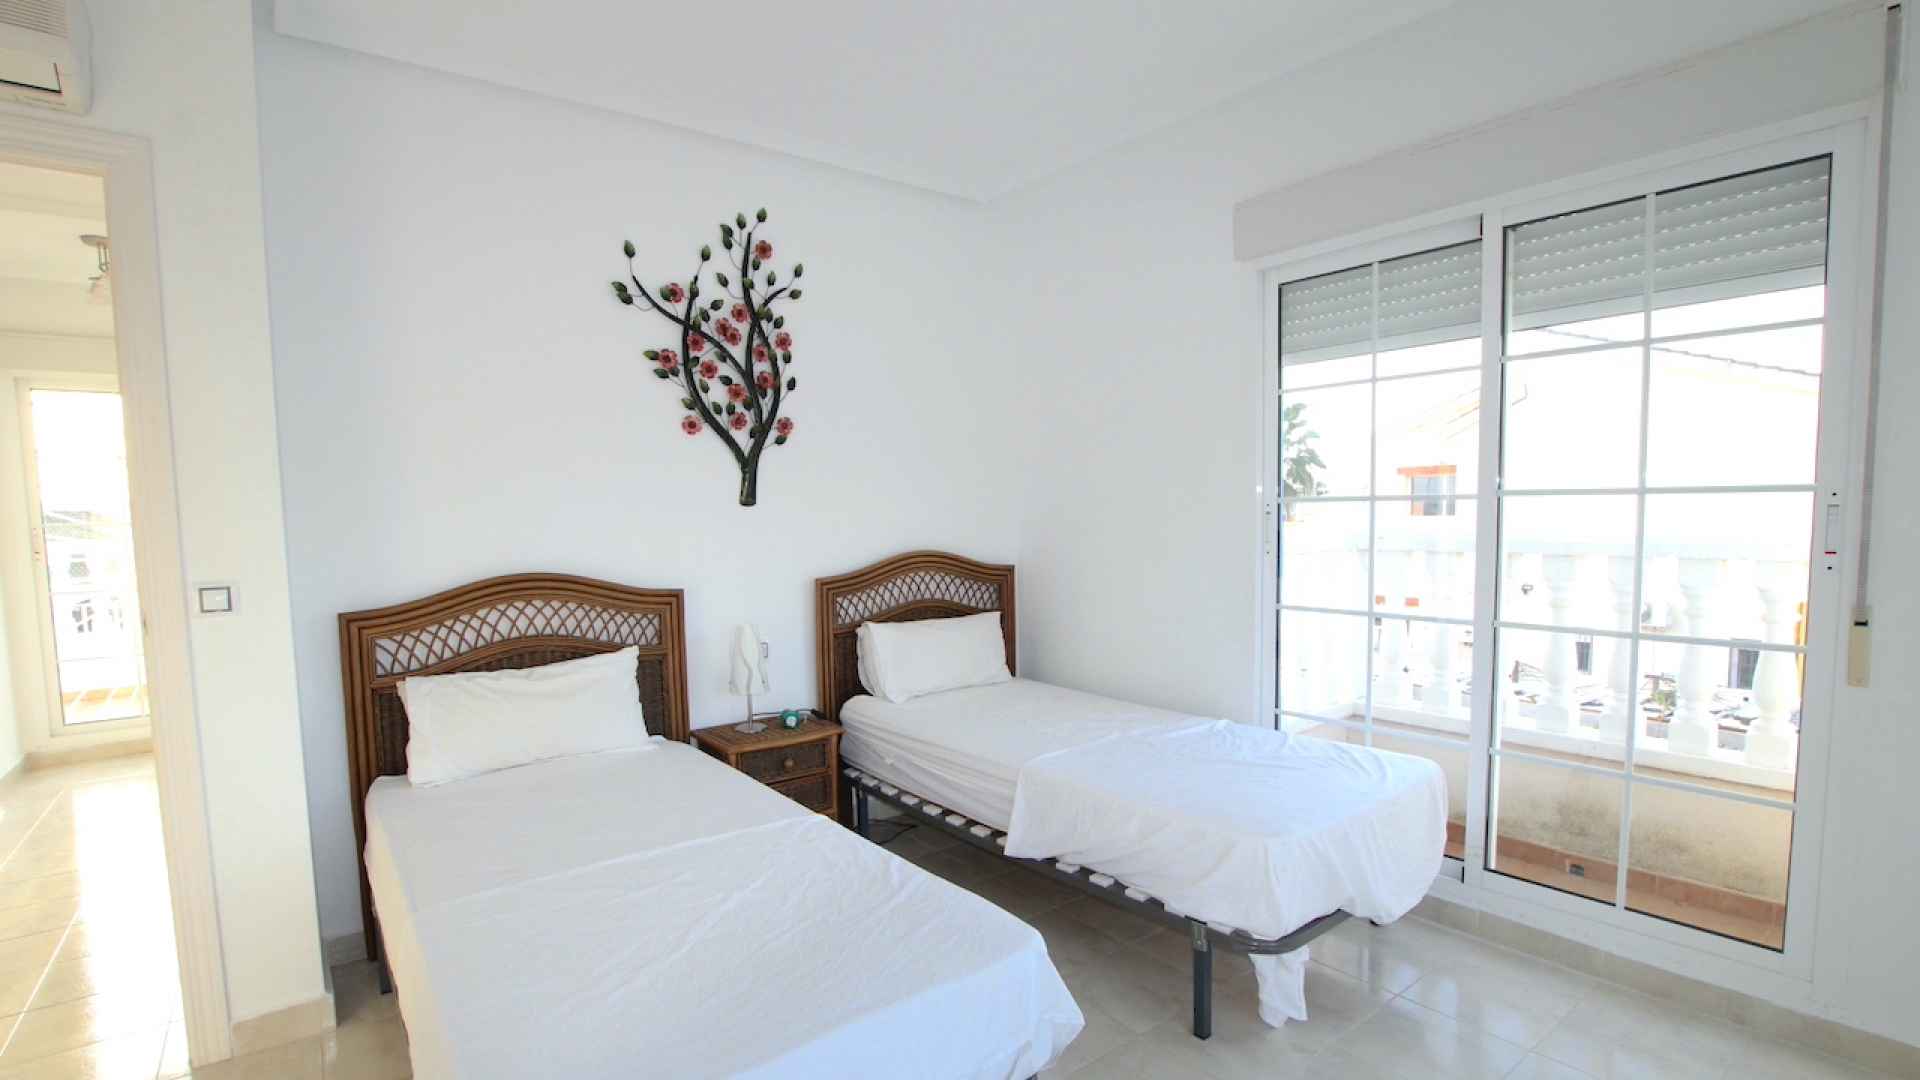 47910_fabulous_4_bedroom_villa_with_pool_central_quesada_131222115511_img_1955